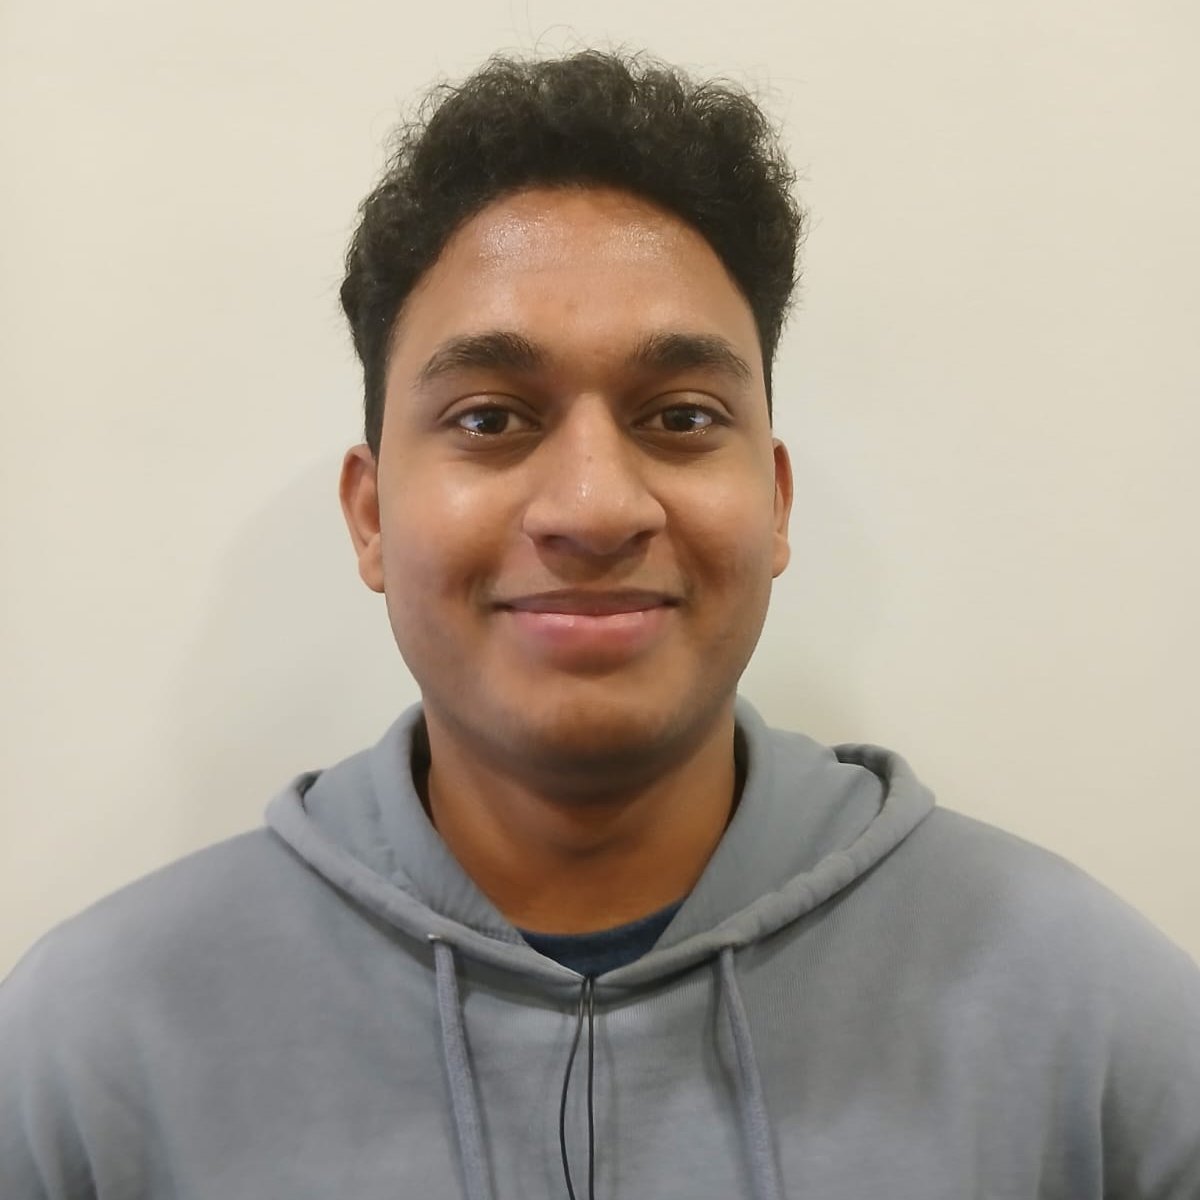 The North East London #MentalHealth Crisis Response Service via #NHS111 has now been live for 10 days. We spoke to Kiran, who took the very first call last week. Take a read: tinyurl.com/3jktet7d @EdwinCCN